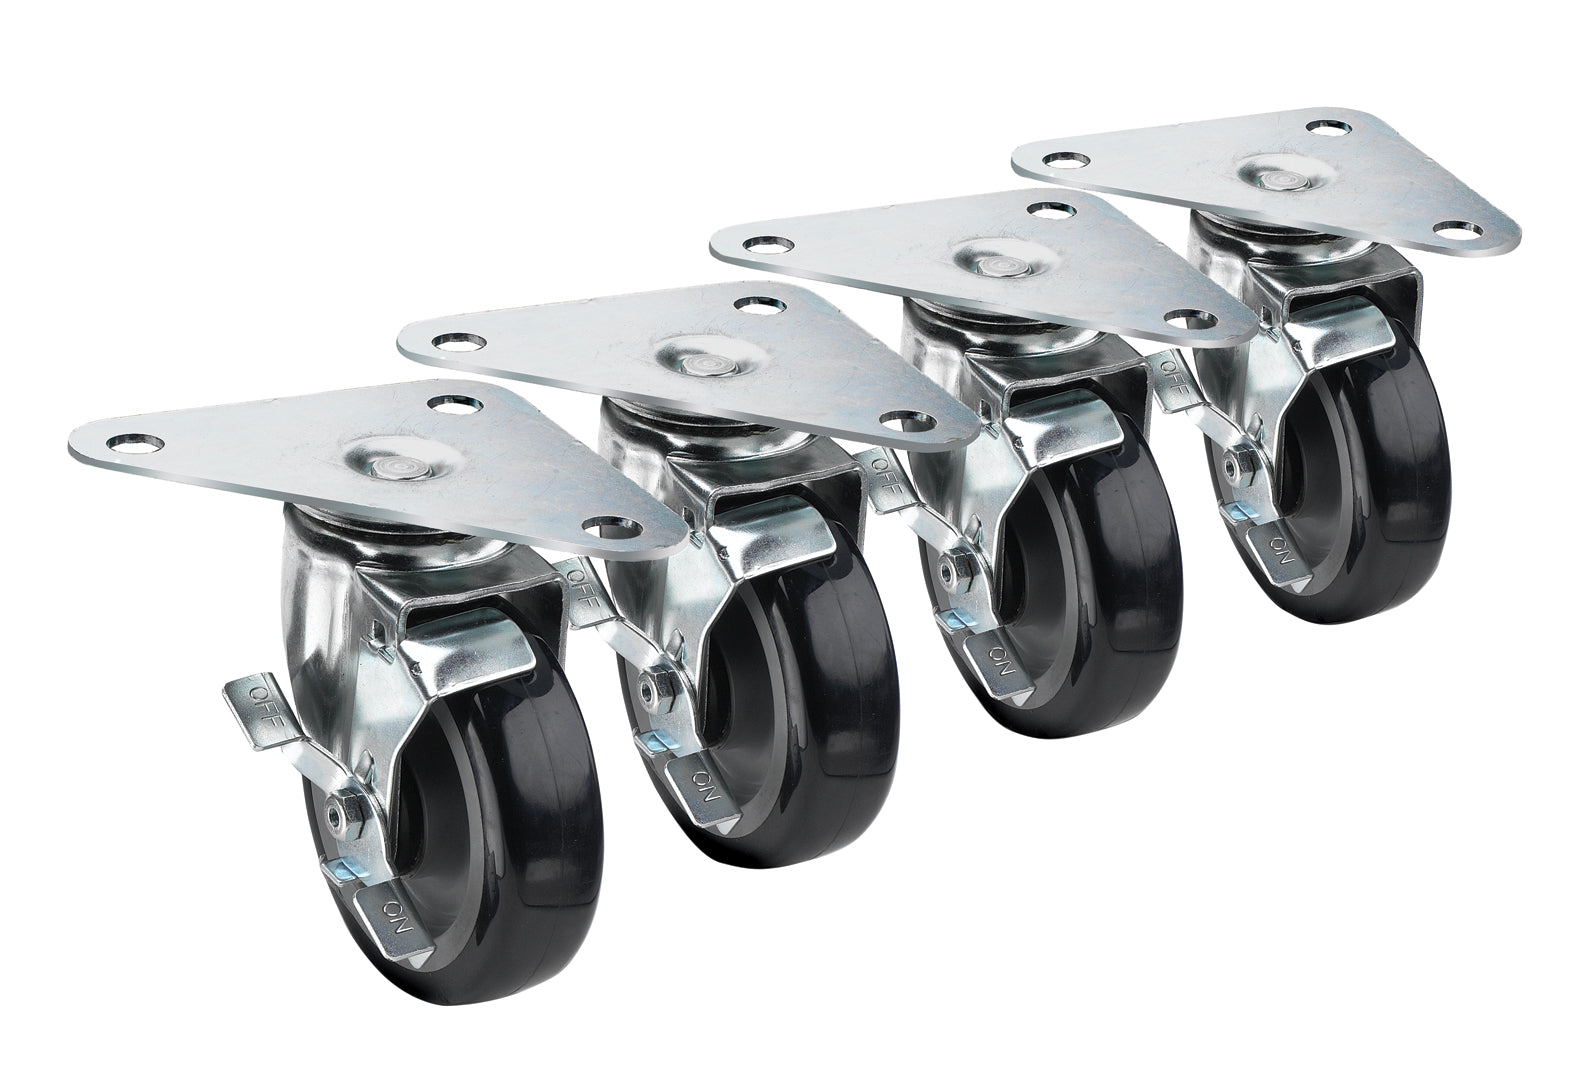 Krowne 28-161S SET OF HEAVY DUTY TRIANGLE PLATE CASTERS W/ 5" LOCKING WHEELS, 500 LBS PER CASTER- 4 PIECES          